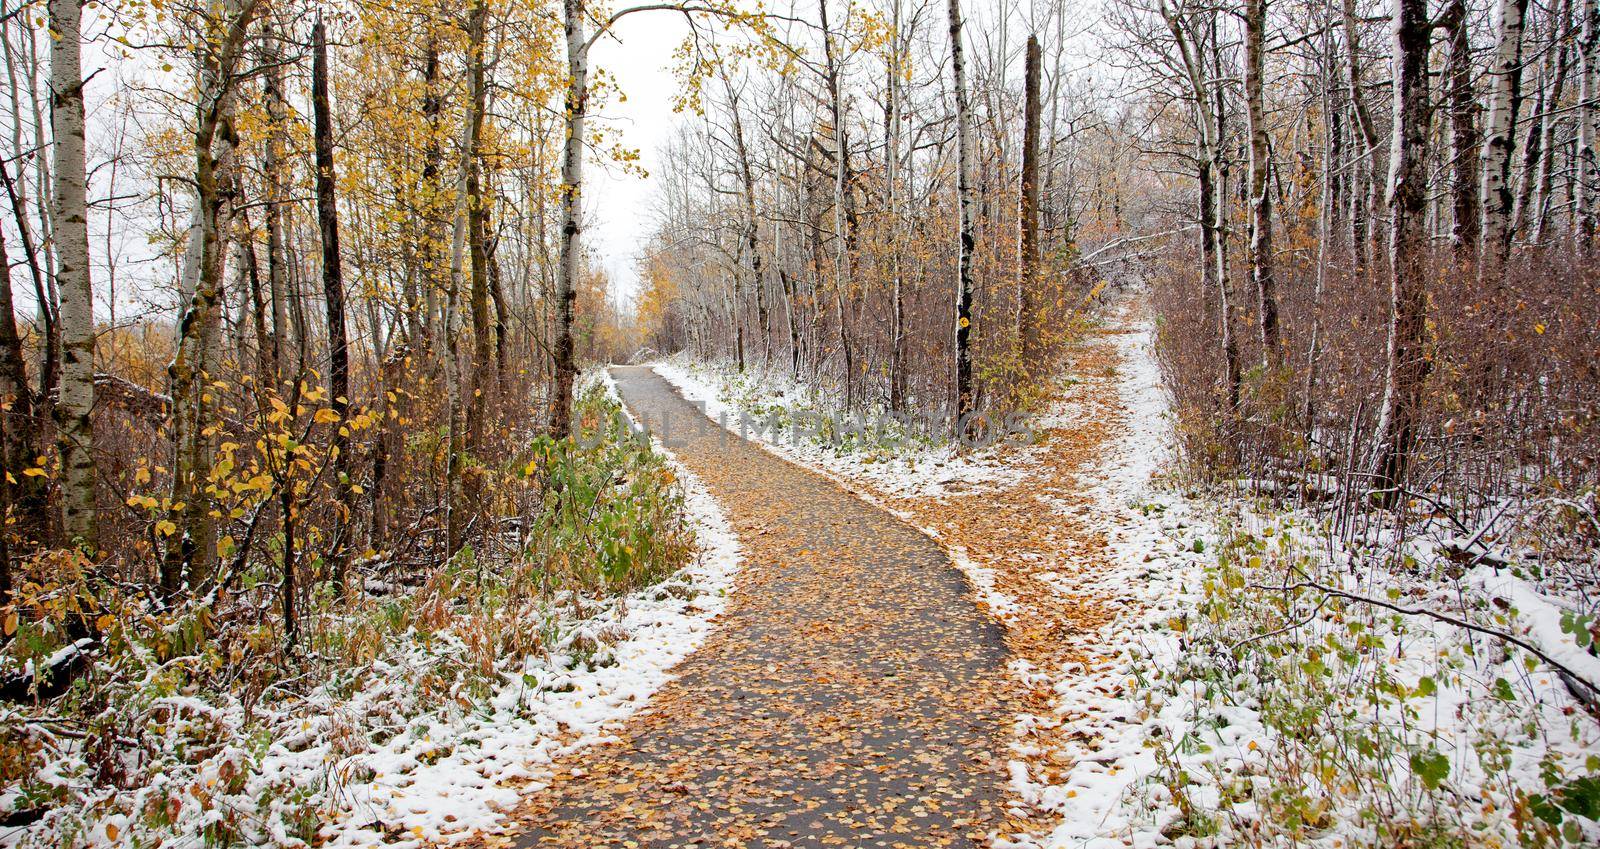  a snowy winter path with a fork in the road, with autumn leaves in Canada